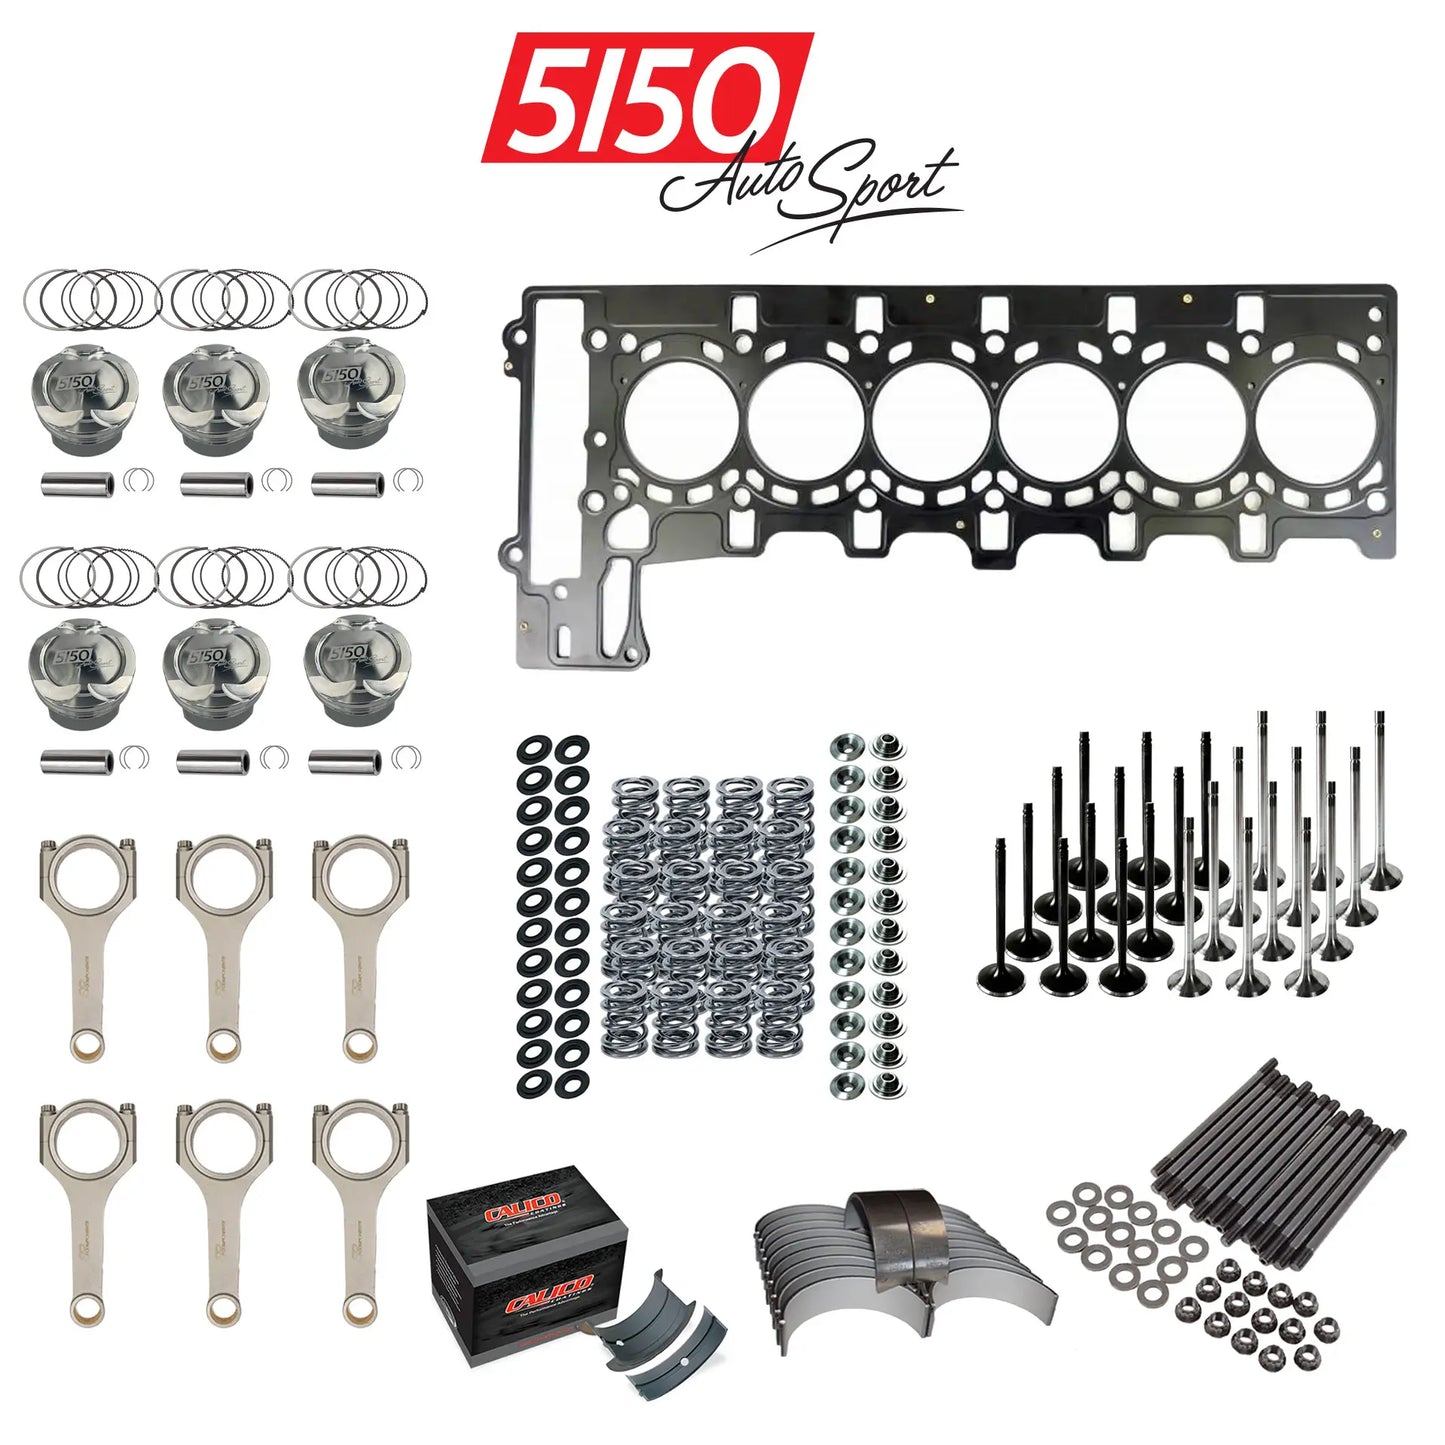 BMW N55 Complete Engine Build Kit by 5150 AutoSport